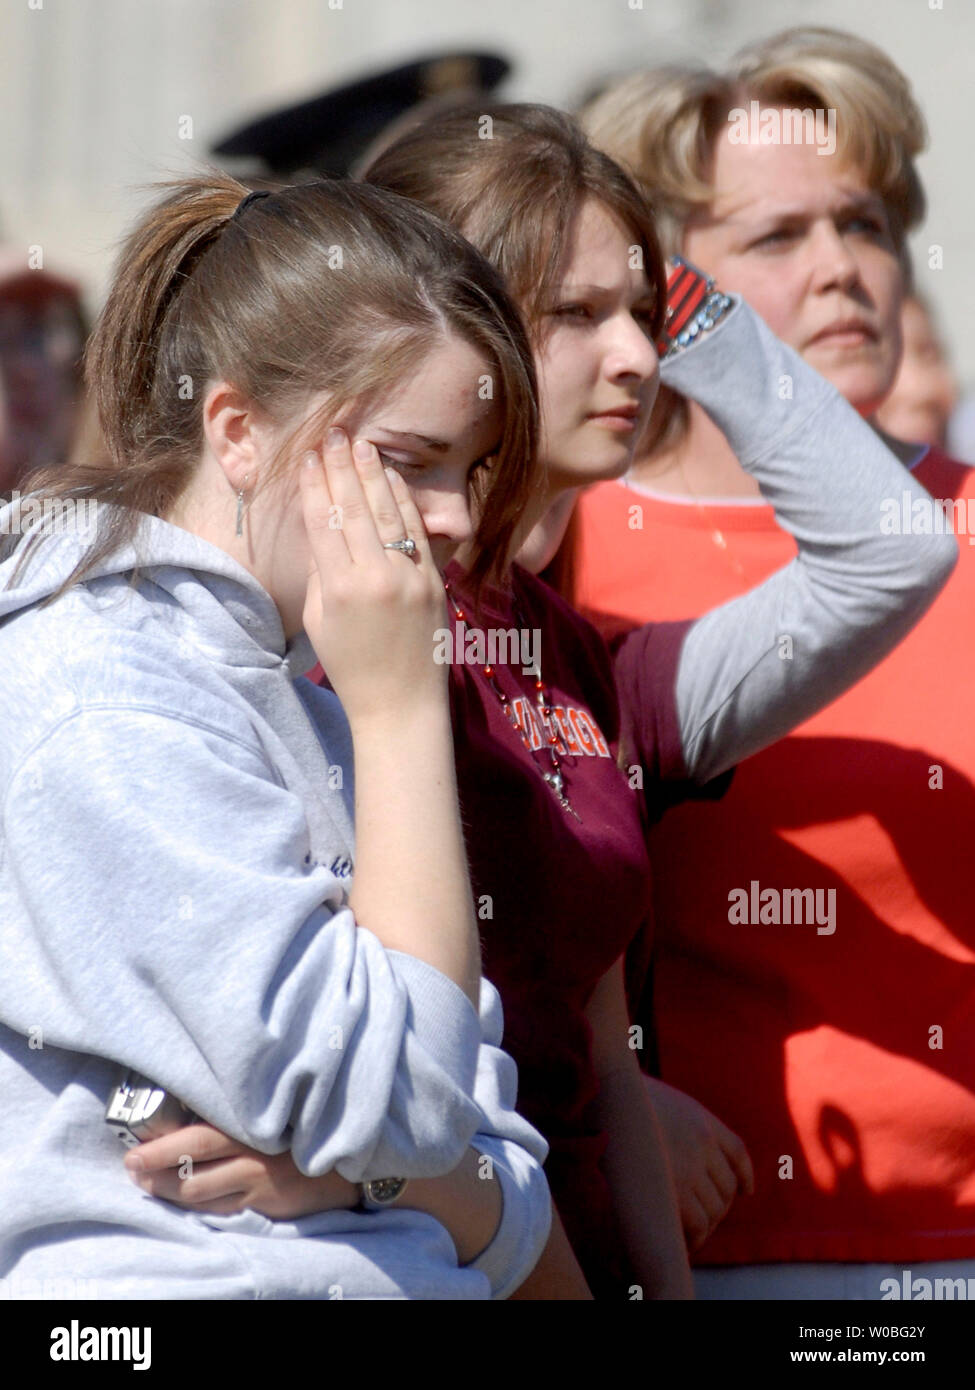 A students wipe tears from her face during a silent vigil to honor the 32 victims of last Mondays shooting, on the campus of Virginia Tech in Blacksburg, Virginia on April 23, 2007. Cho Seung-Hui, a student at Virginia Tech, went on a shooting spree and killed 32 people on April 16, 2007. Today was the first day of classes since the shooting. (UPI Photo/Kevin Dietsch) Stock Photo